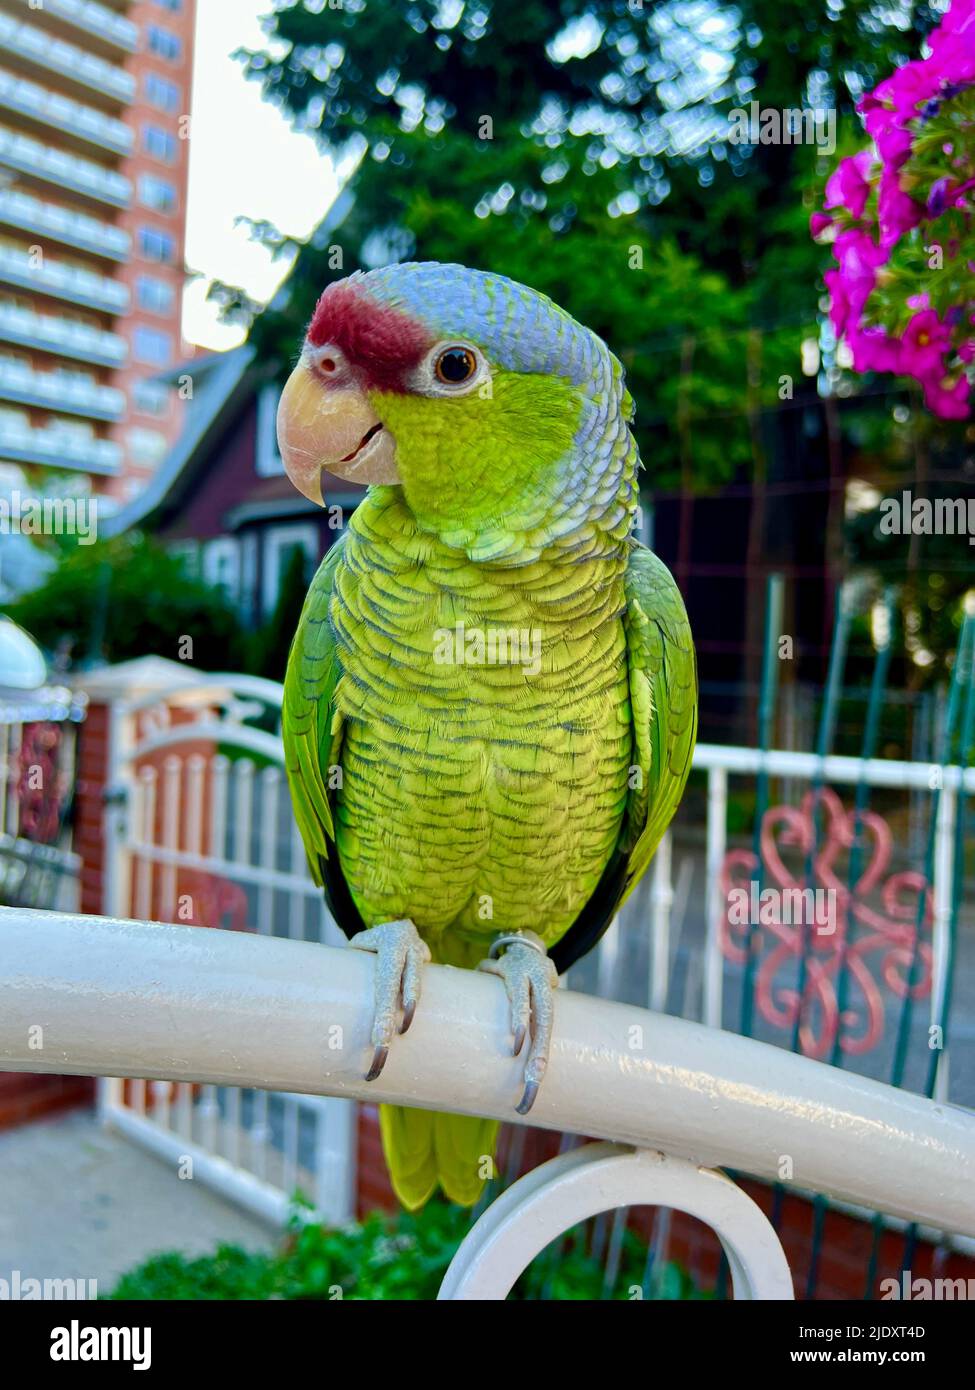 Lavender Amazonian Parrot on a fence in front of his home in the Kensington neighborhood of Brooklyn, New York. Stock Photo